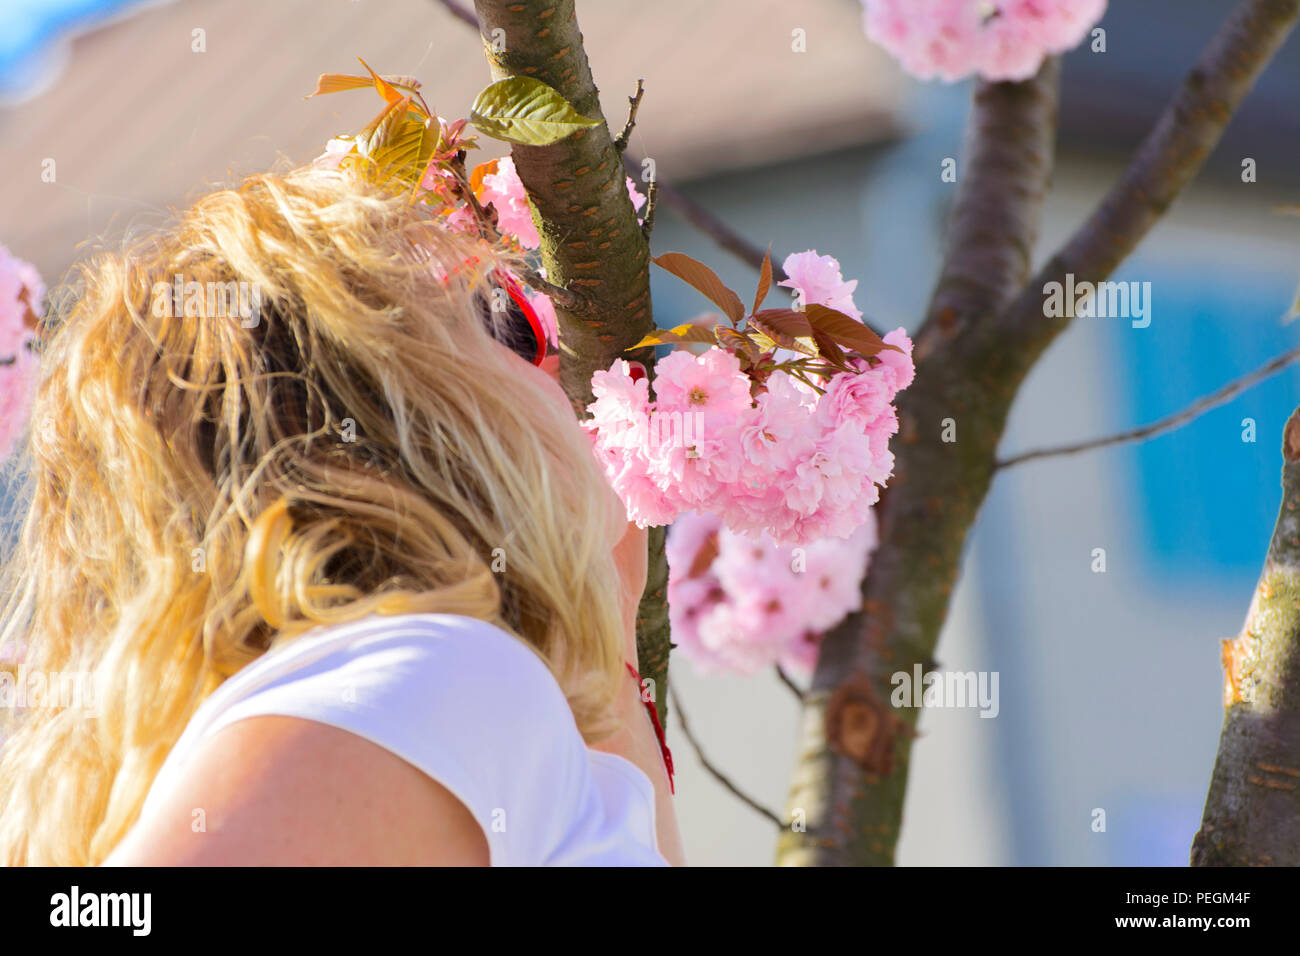 Woman and cherry blossom or Sakura flower on a tree branch against a blue sky background. Japanese cherry. Shallow depth of field. Focus on the center Stock Photo